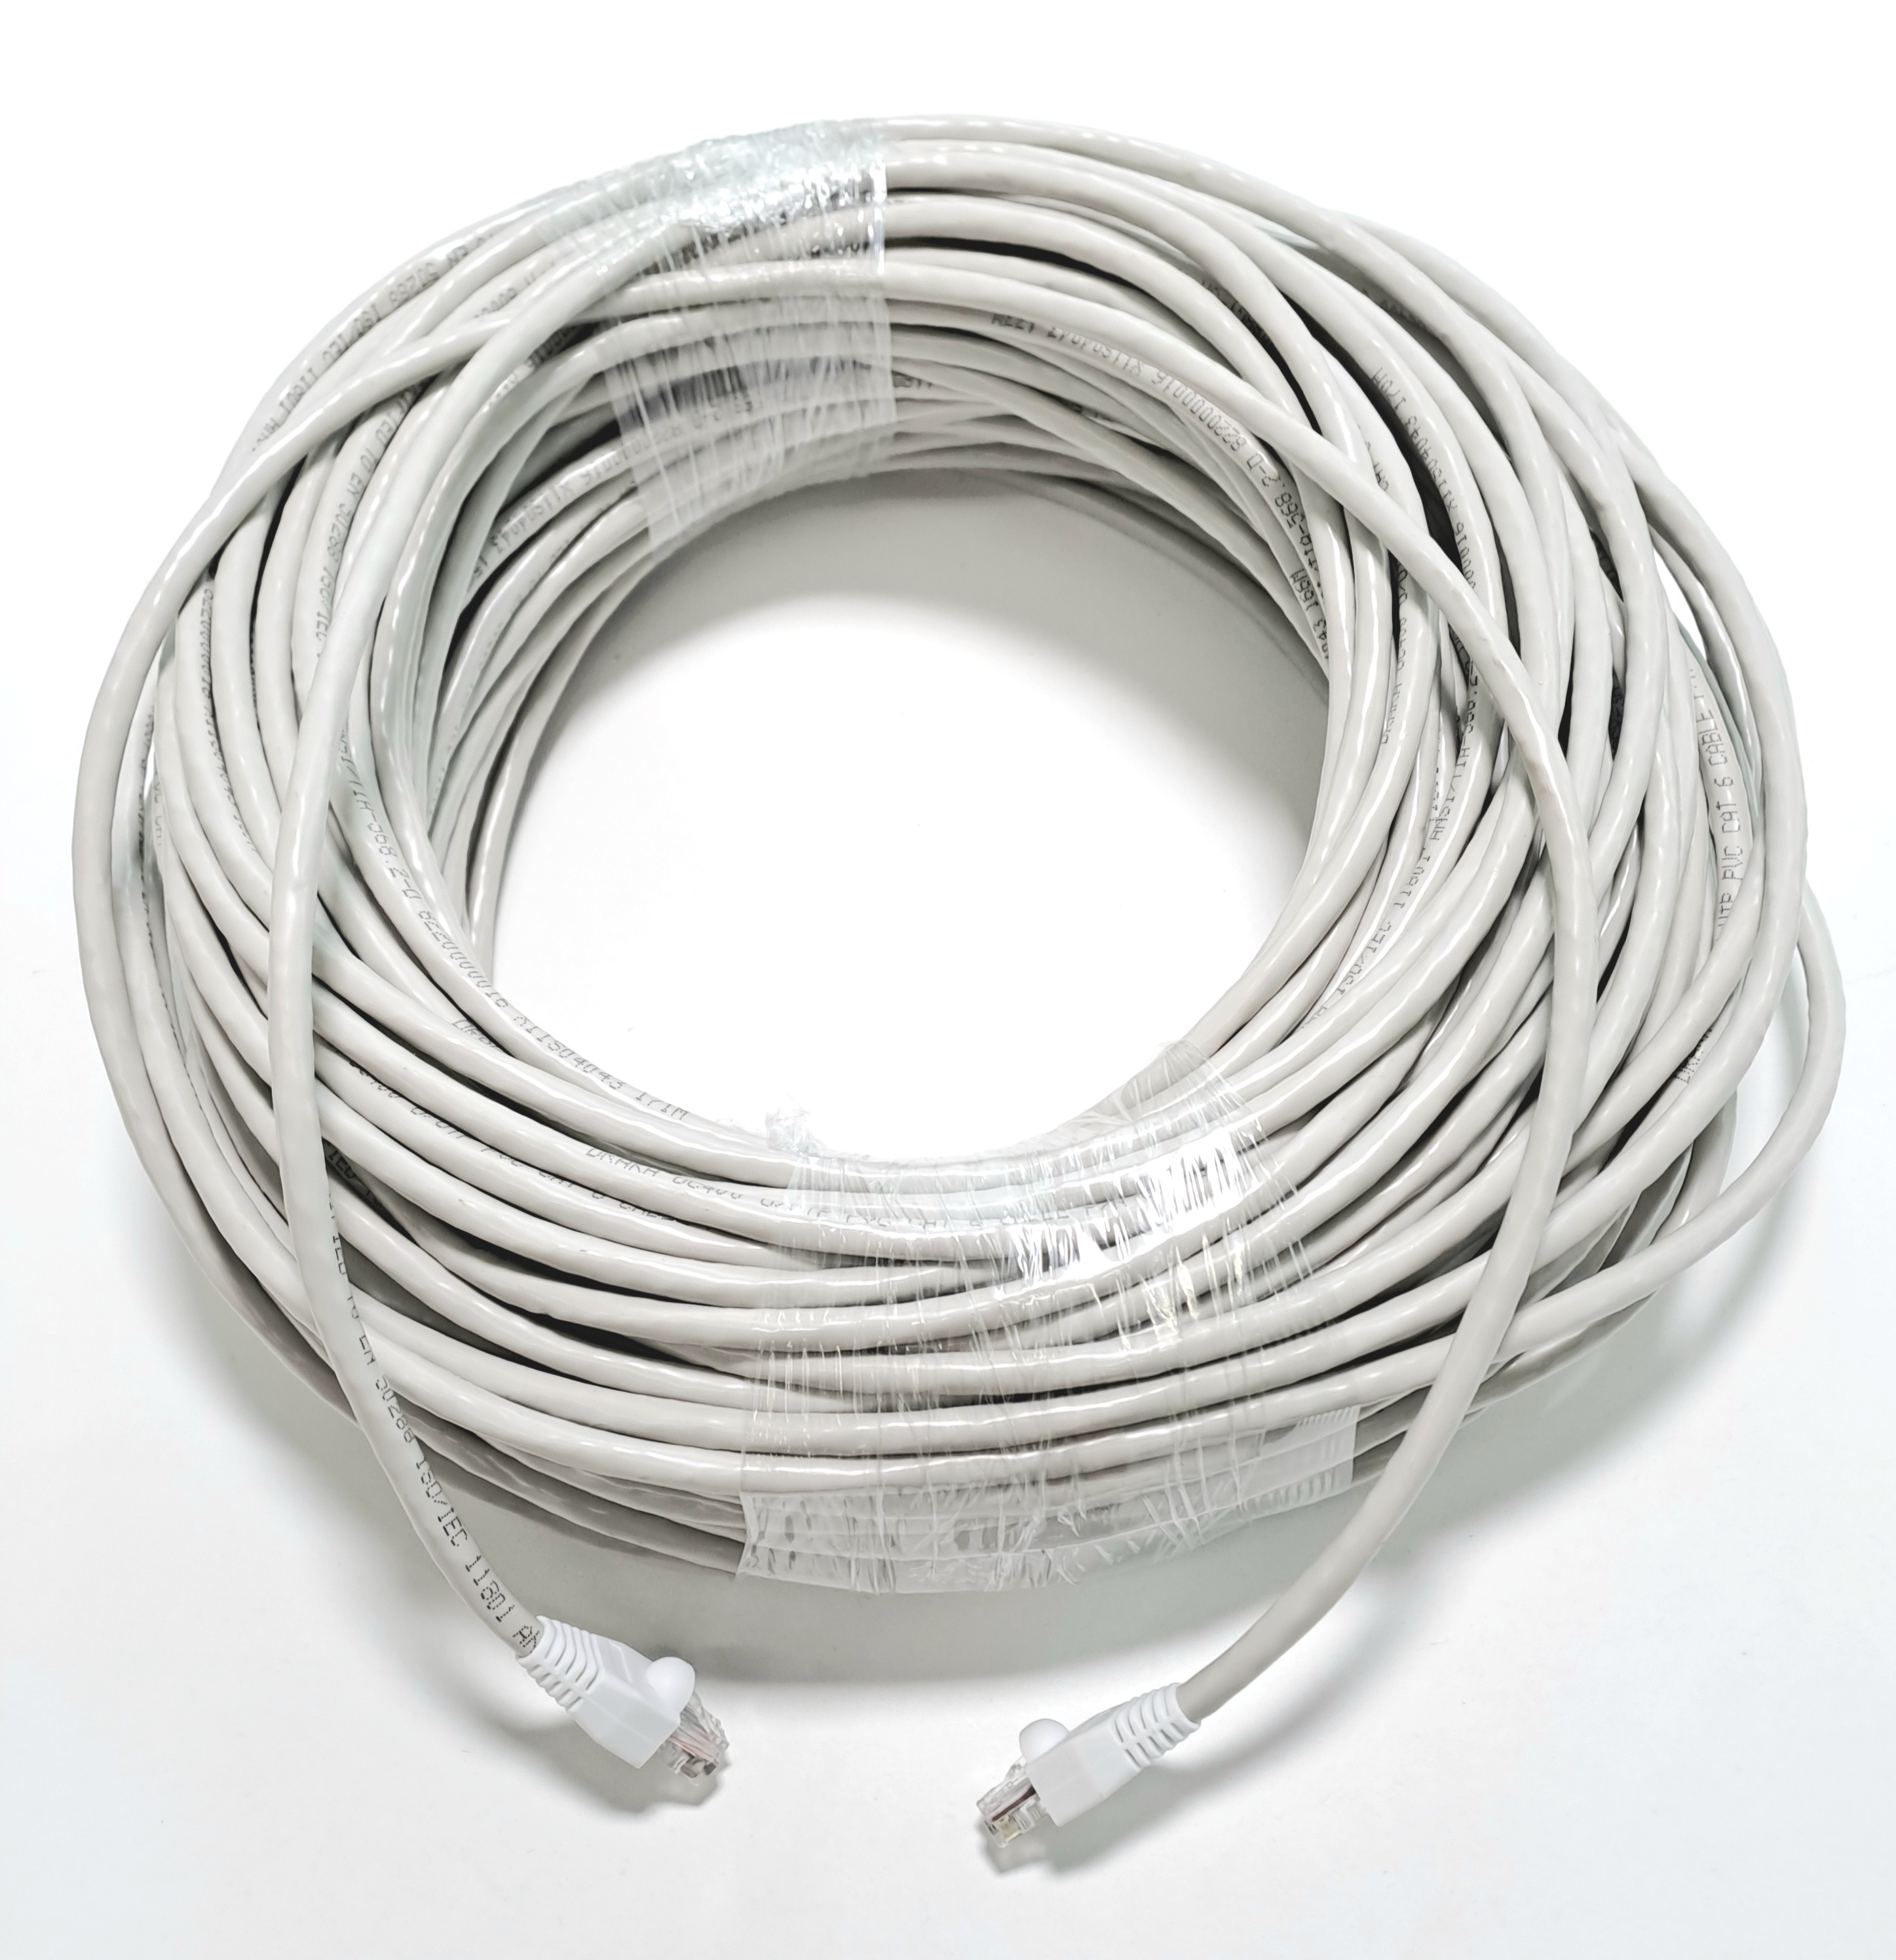 Assembly Cat 6 LAN Cable with Light Grey Rubber Boot 50m